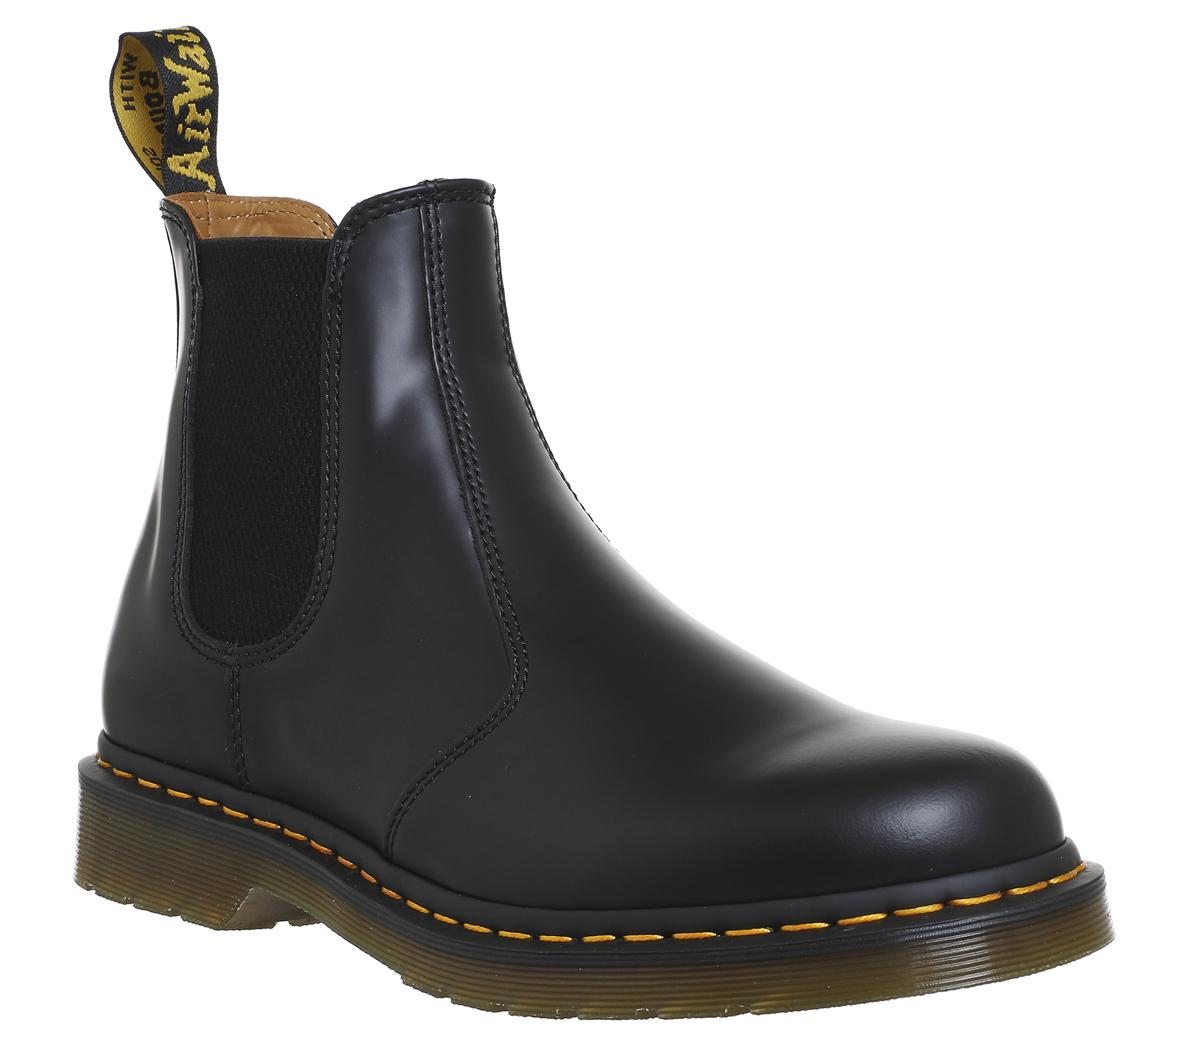 Dr. Martens 2976 Chelsea Boots Black Leather - Boots